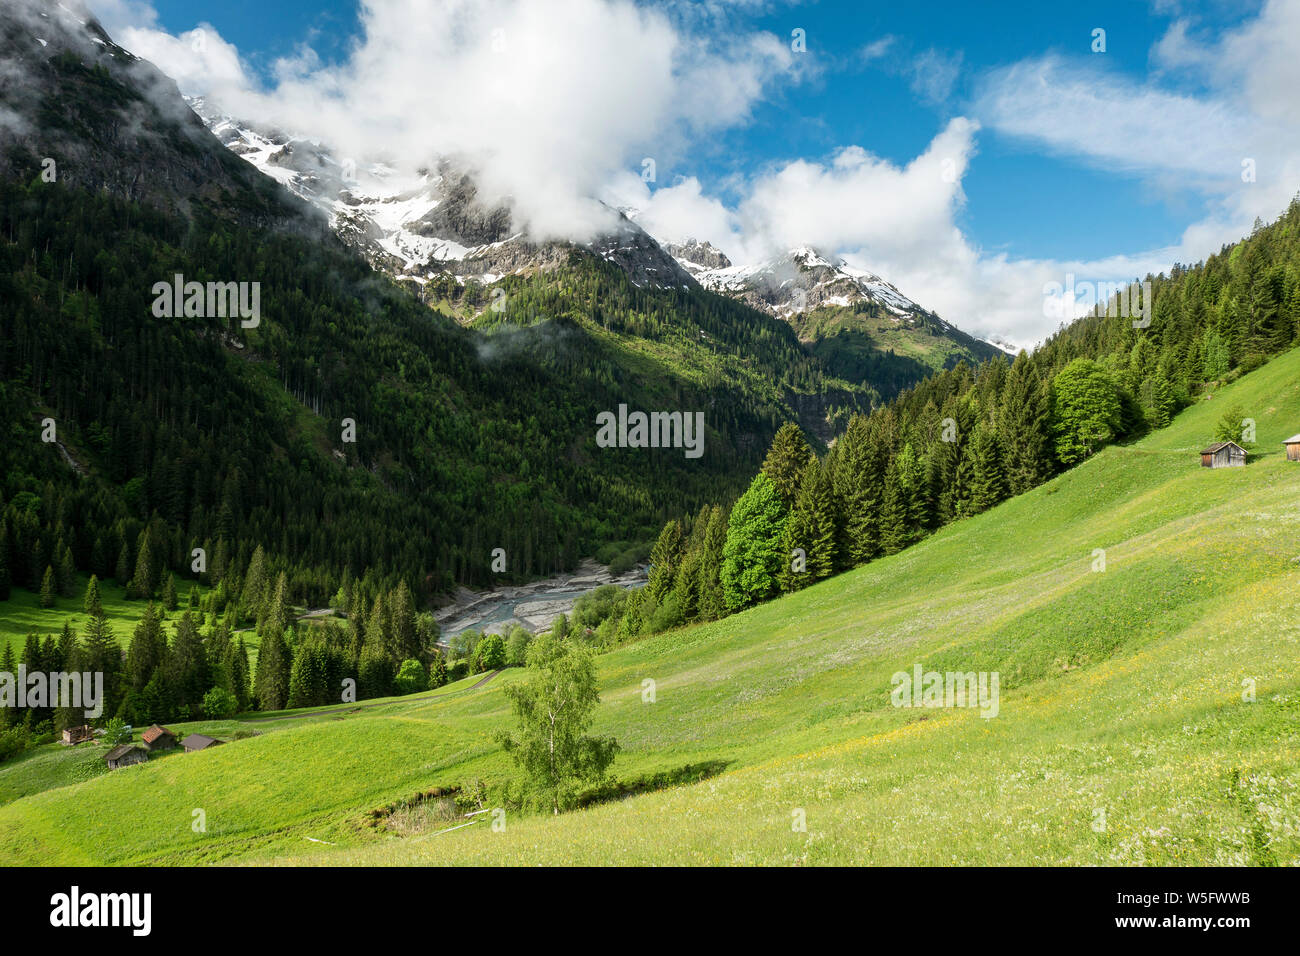 Austria, Tyrol, Allgau Alps, Hornbach valley, a side valley of the Lech watershed Stock Photo